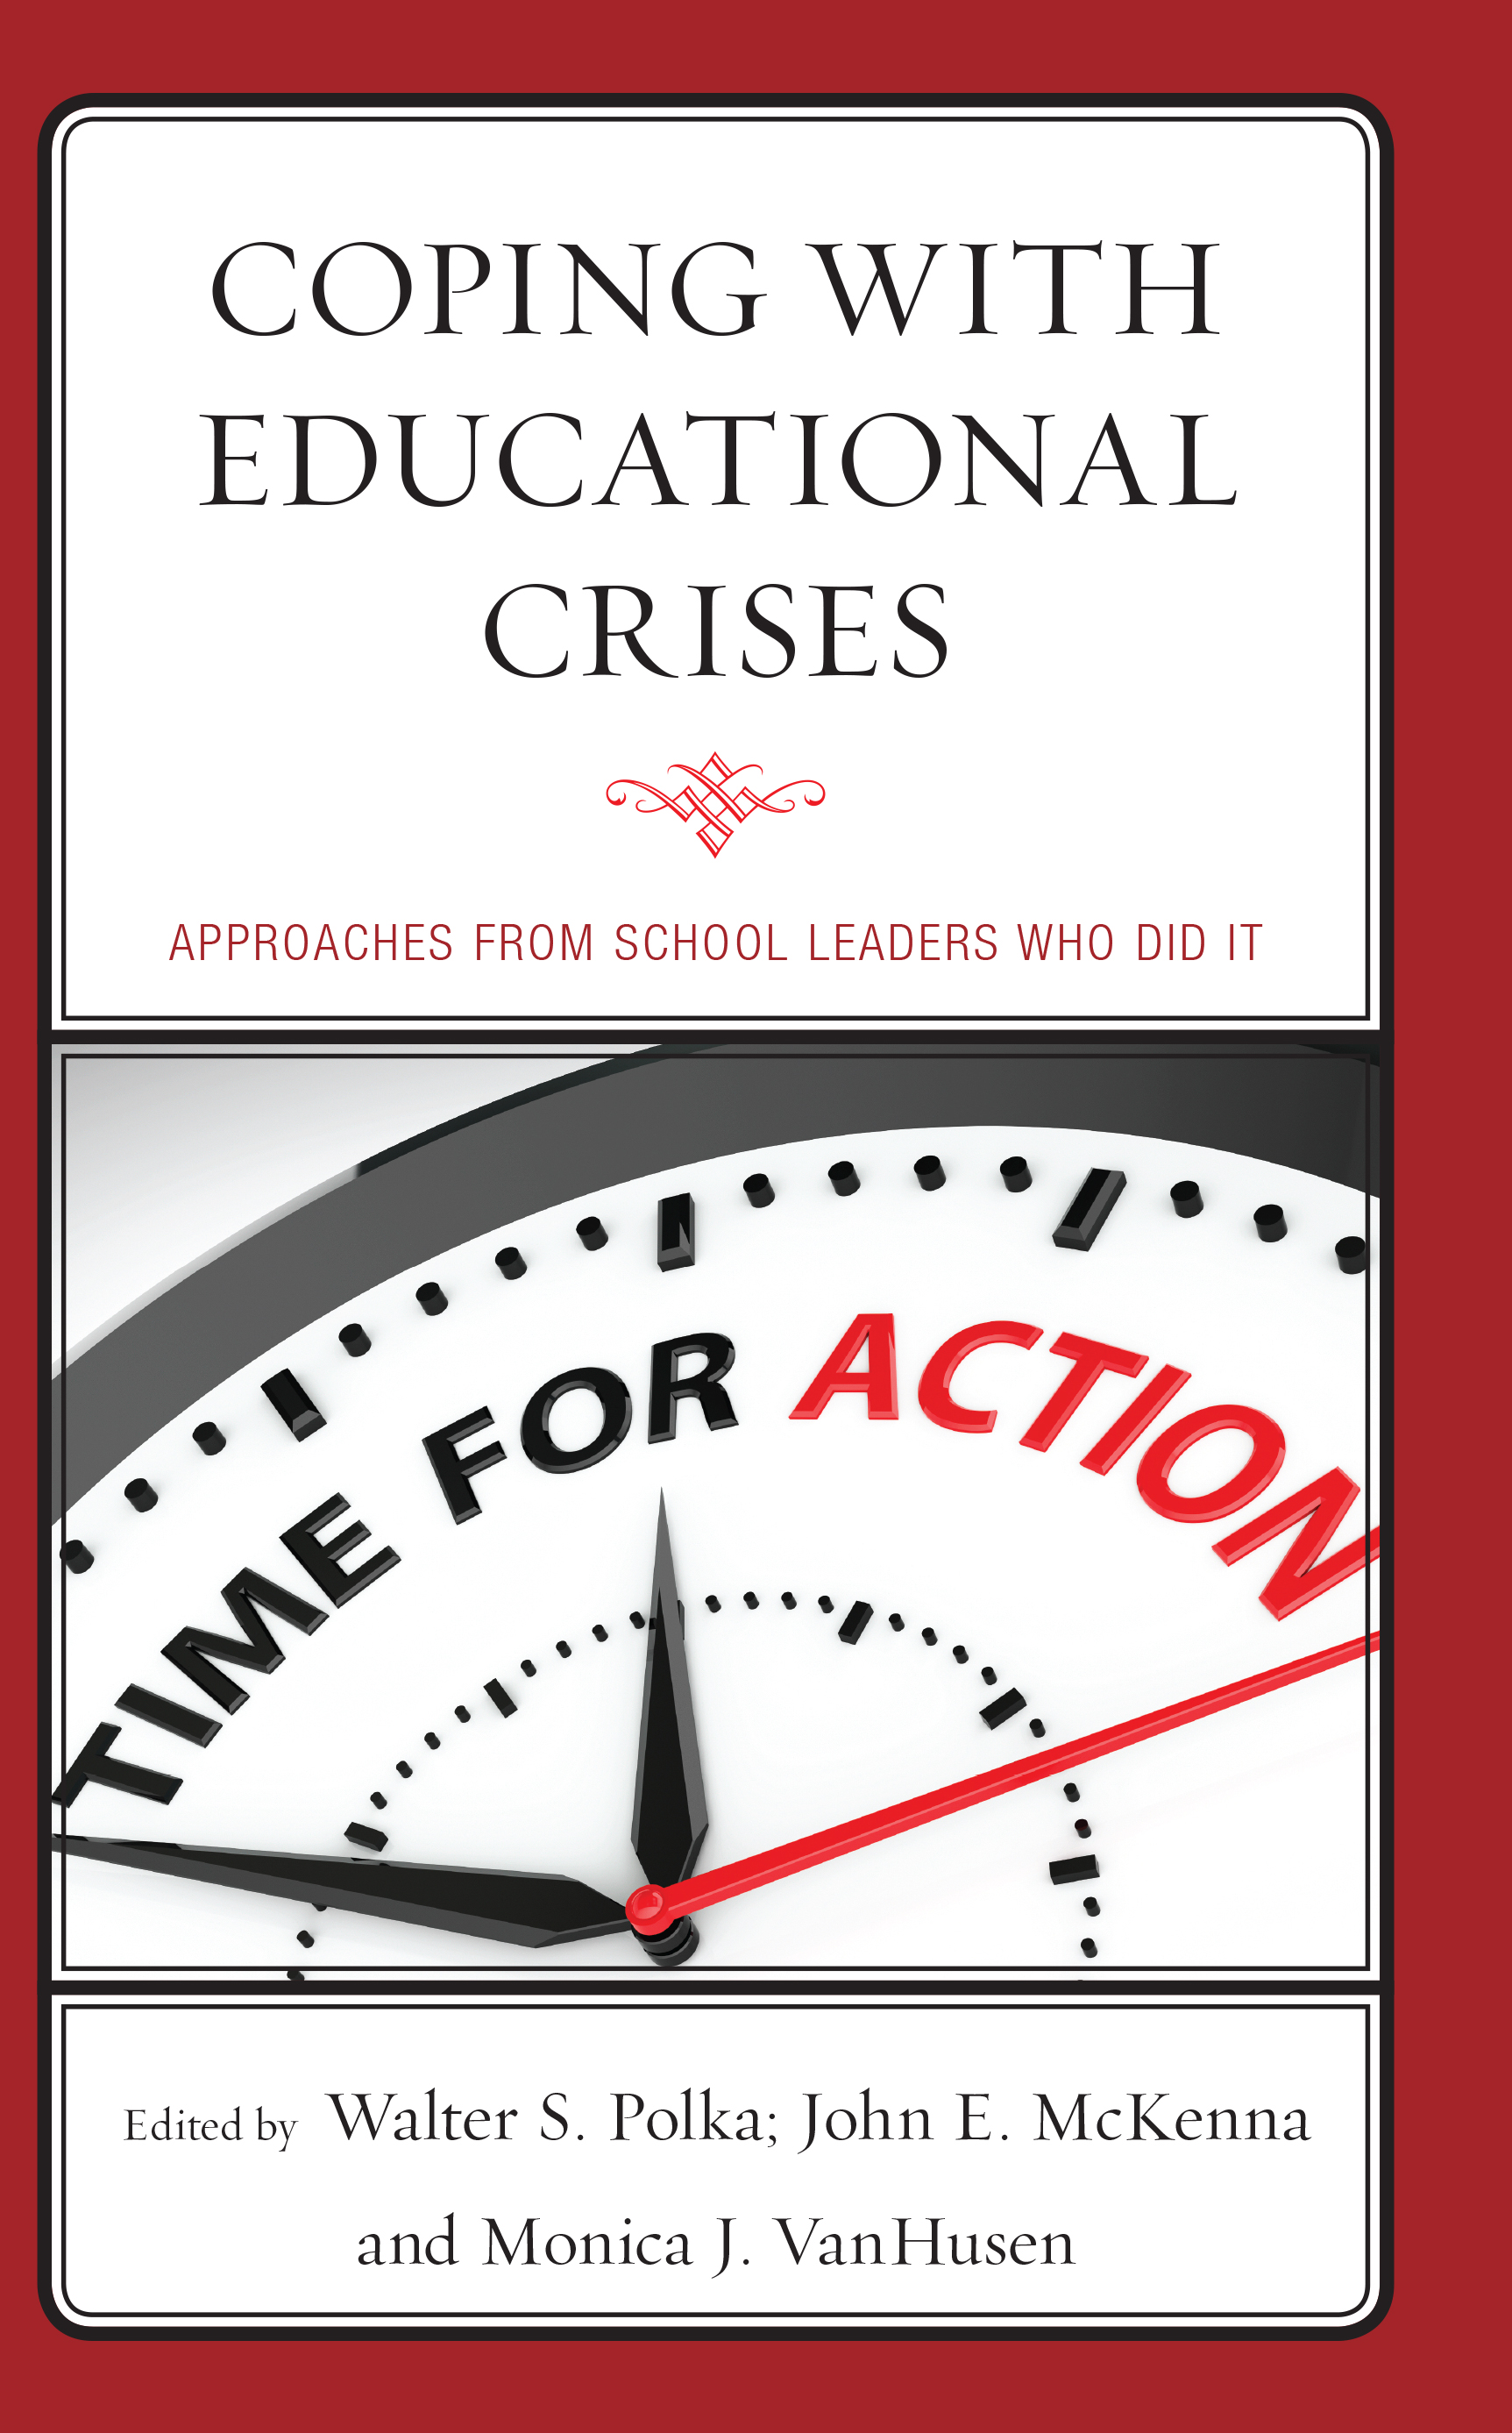 Coping with Educational Crises: Approaches from School Leaders Who Did It